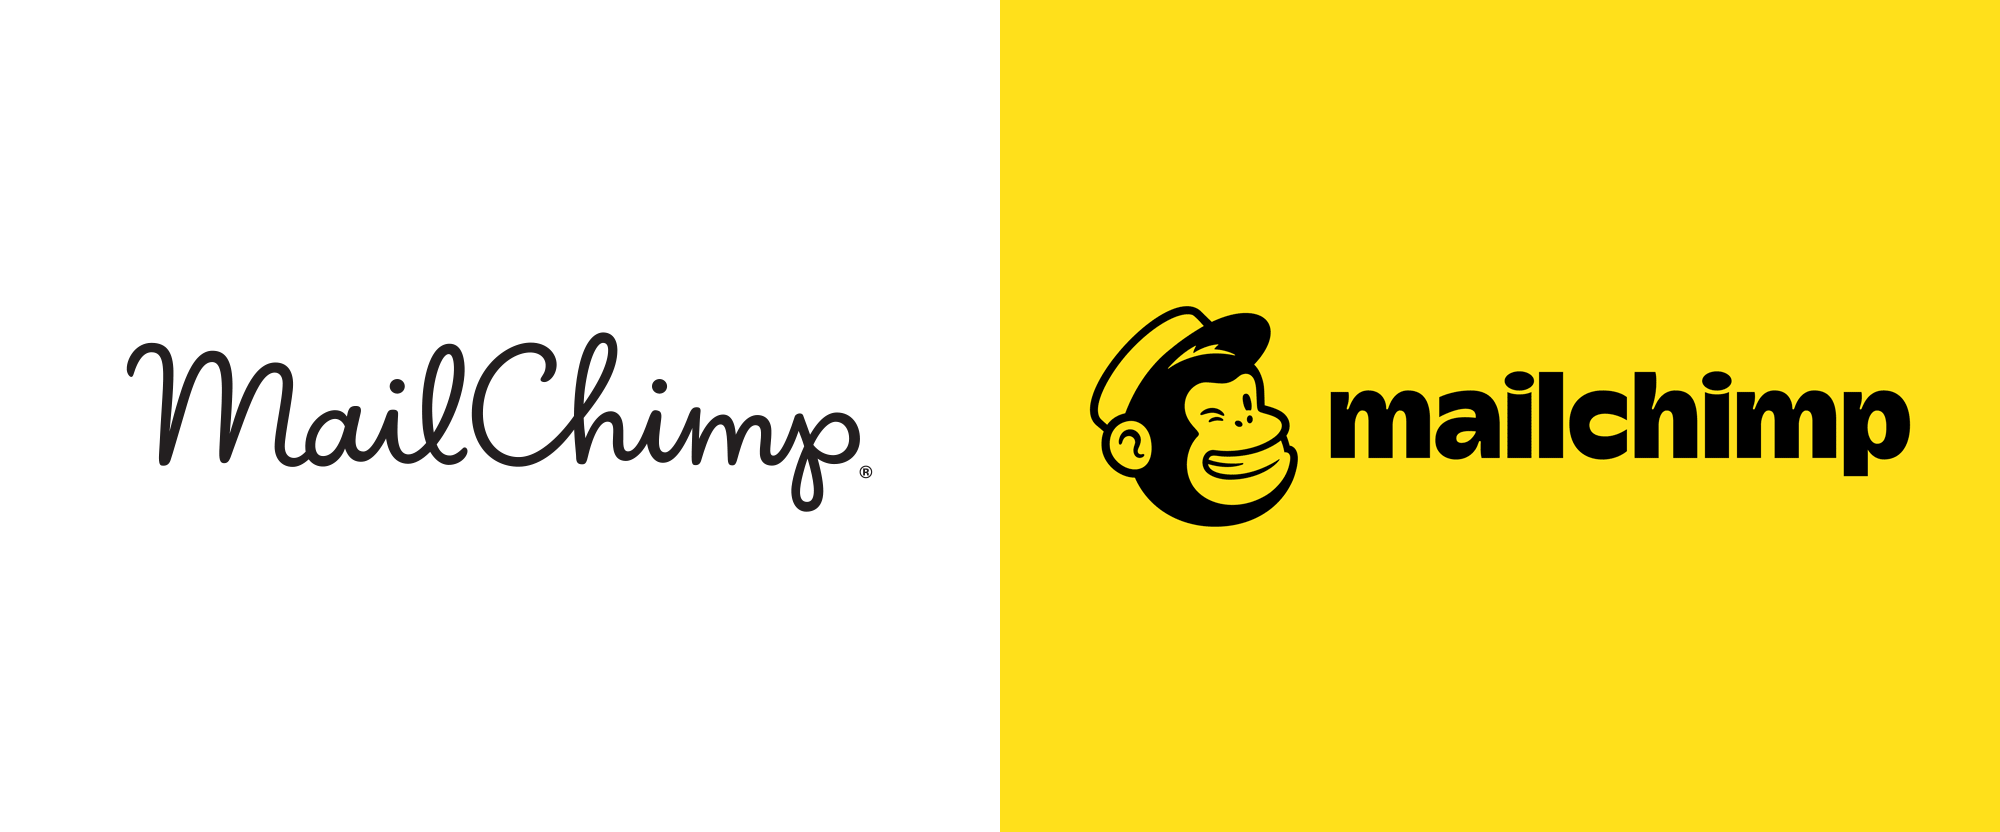 New Logo and Identity for Mailchimp by COLLINS and In-house